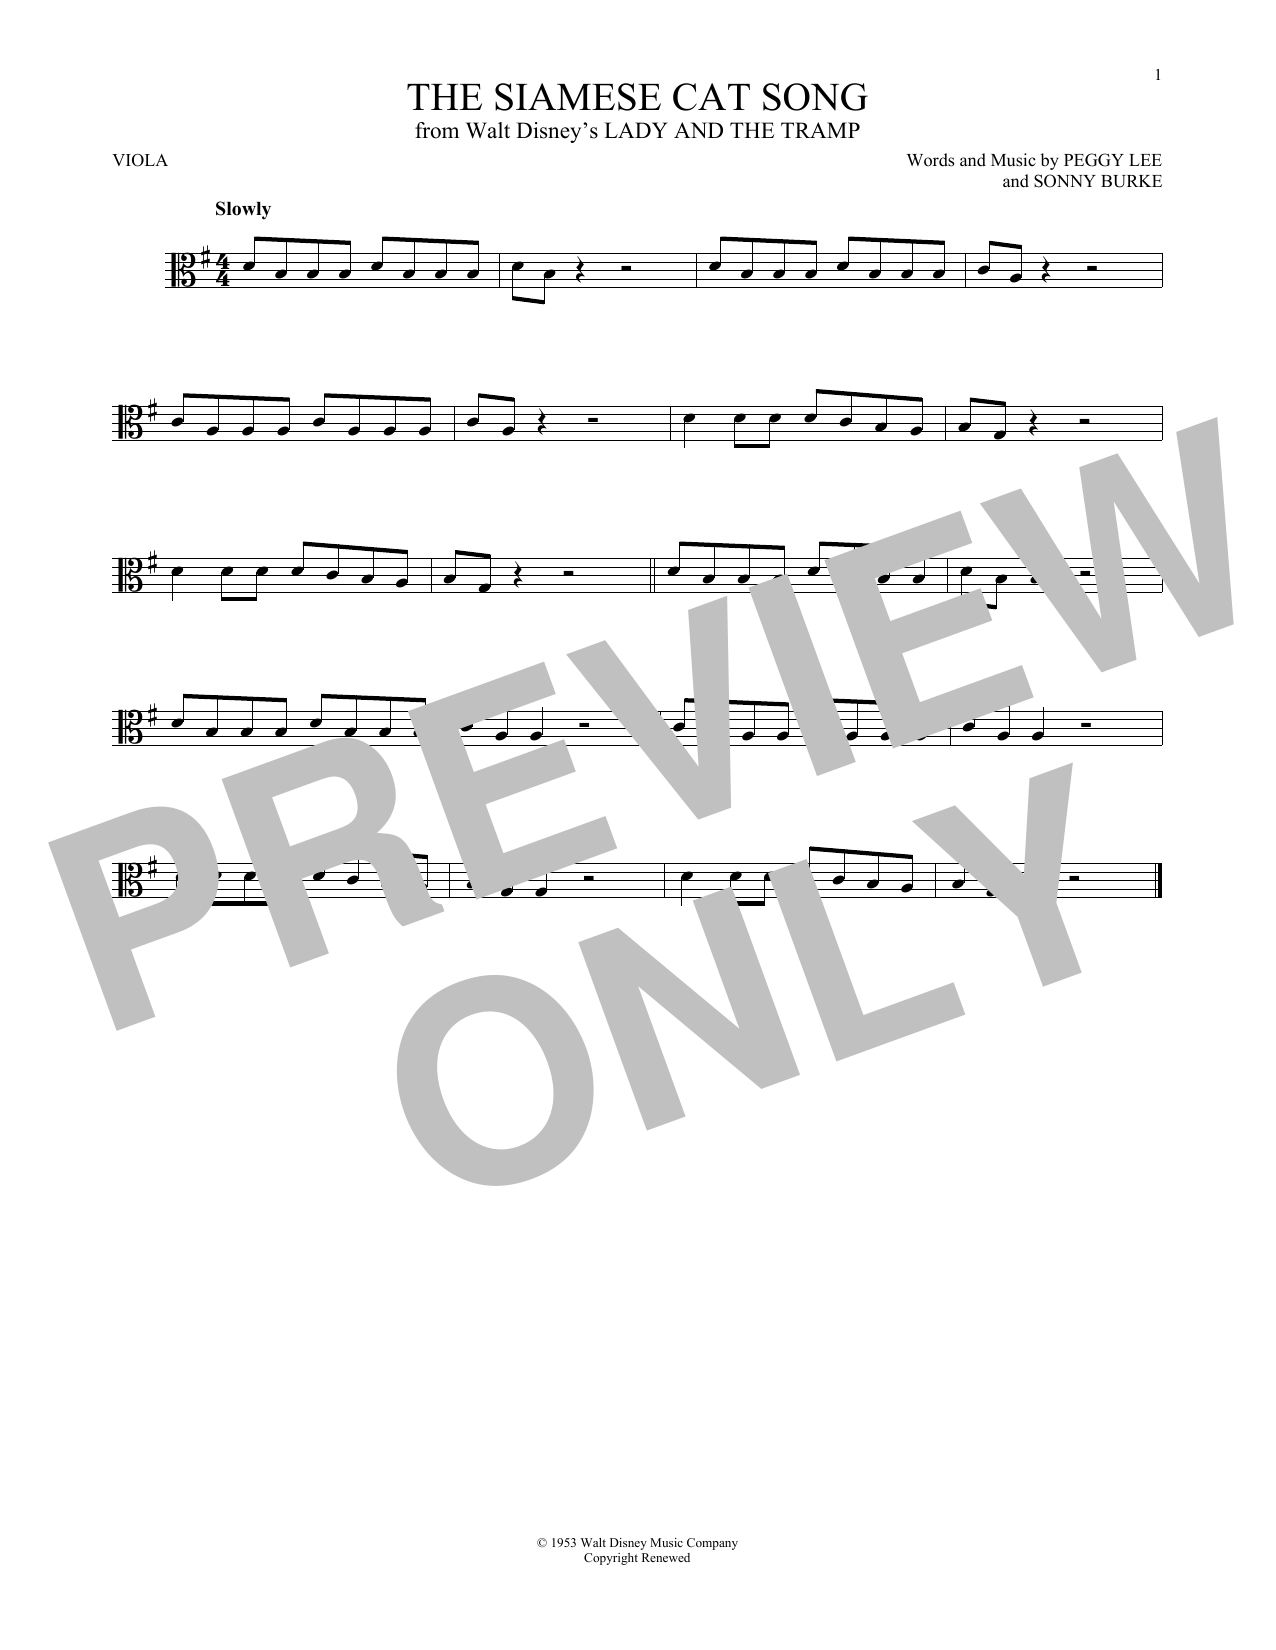 Download Peggy Lee & Sonny Burke The Siamese Cat Song (from Lady And The Sheet Music